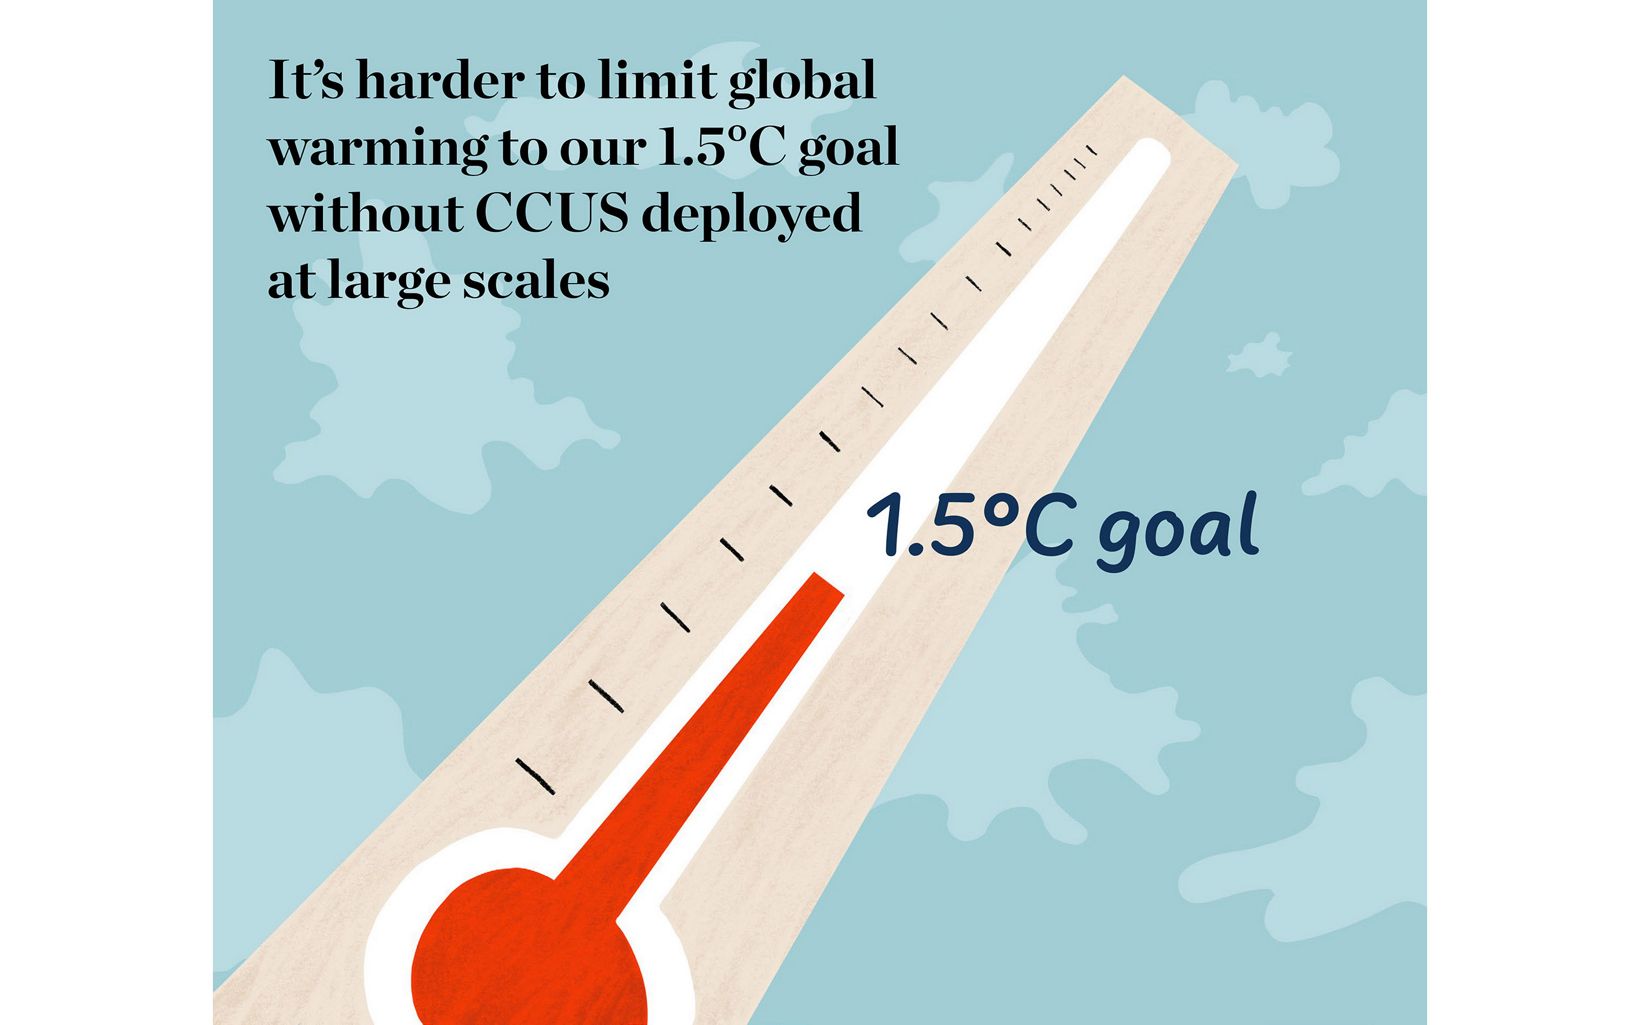 Illustration of a large thermometer, marked with the 1.5°C goal.